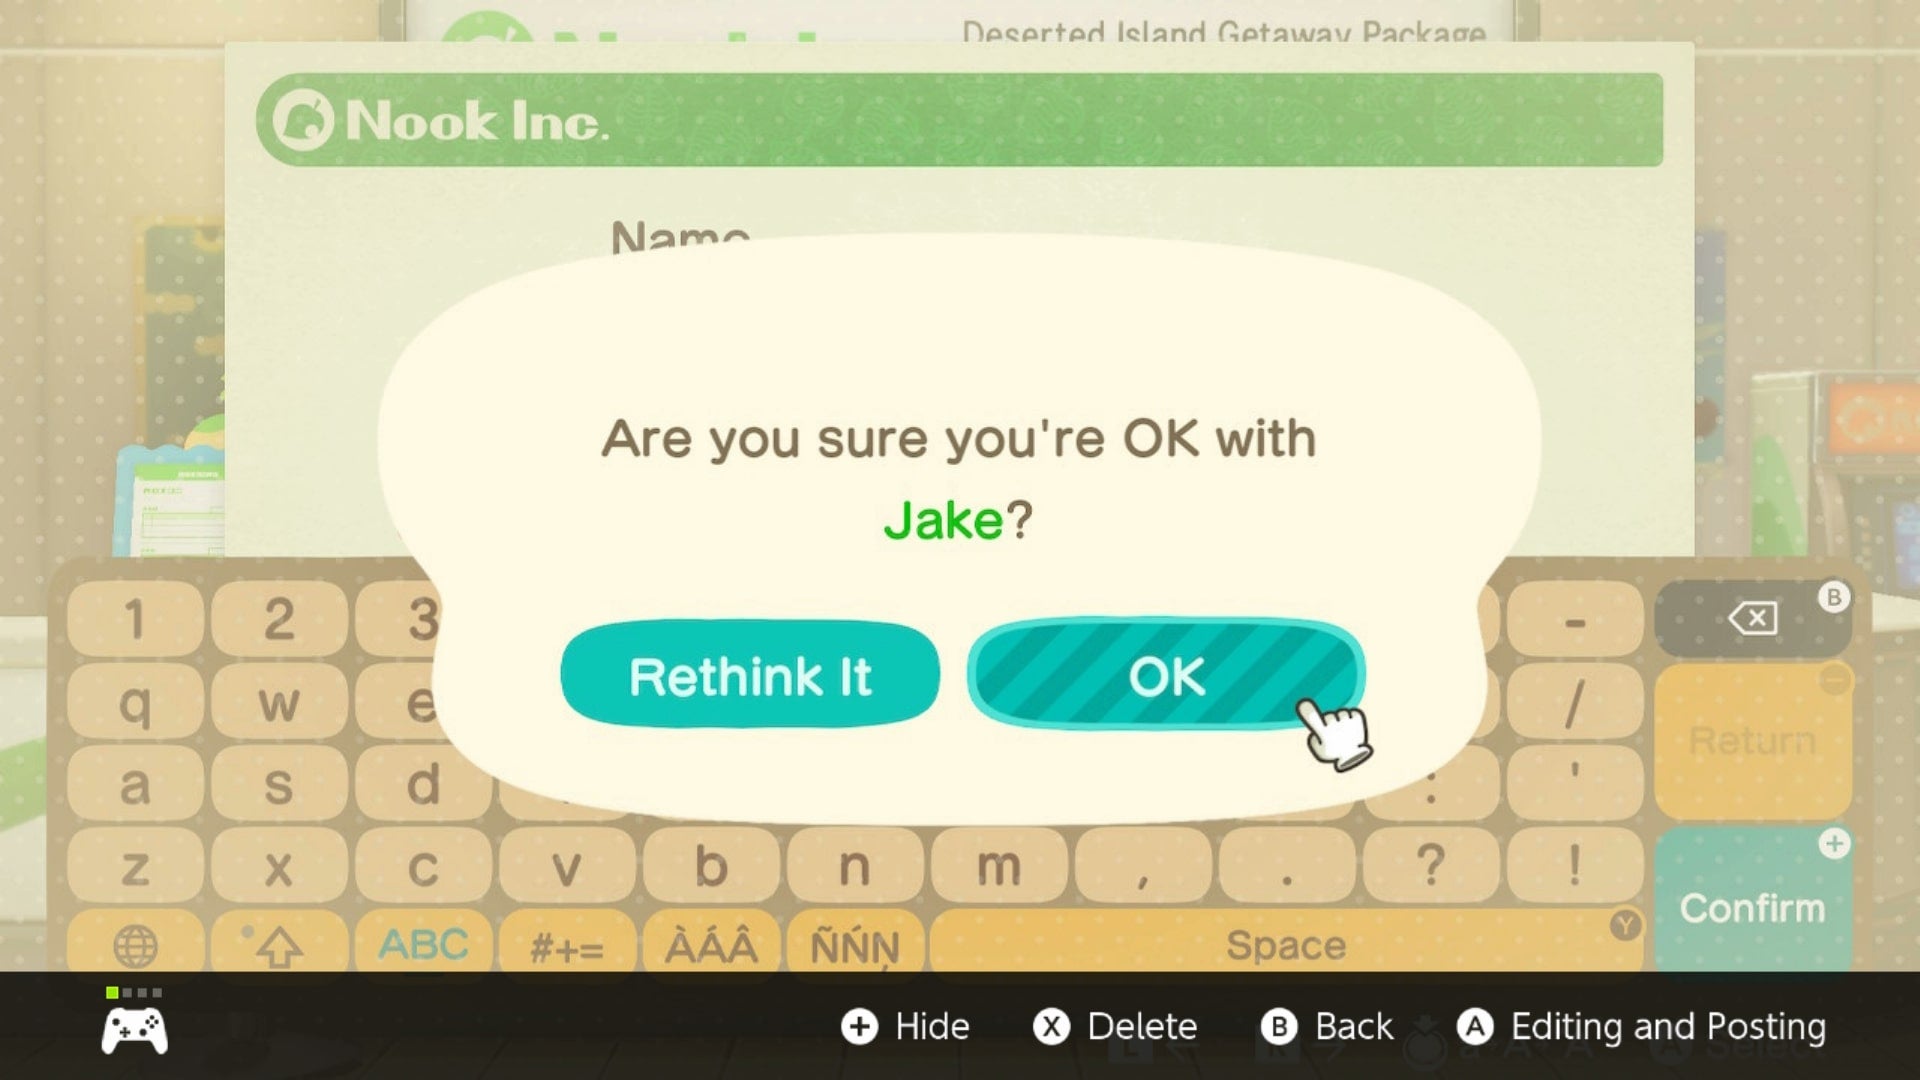 Animal Crossing New Horizons: Can You Change Your Name? | VG247